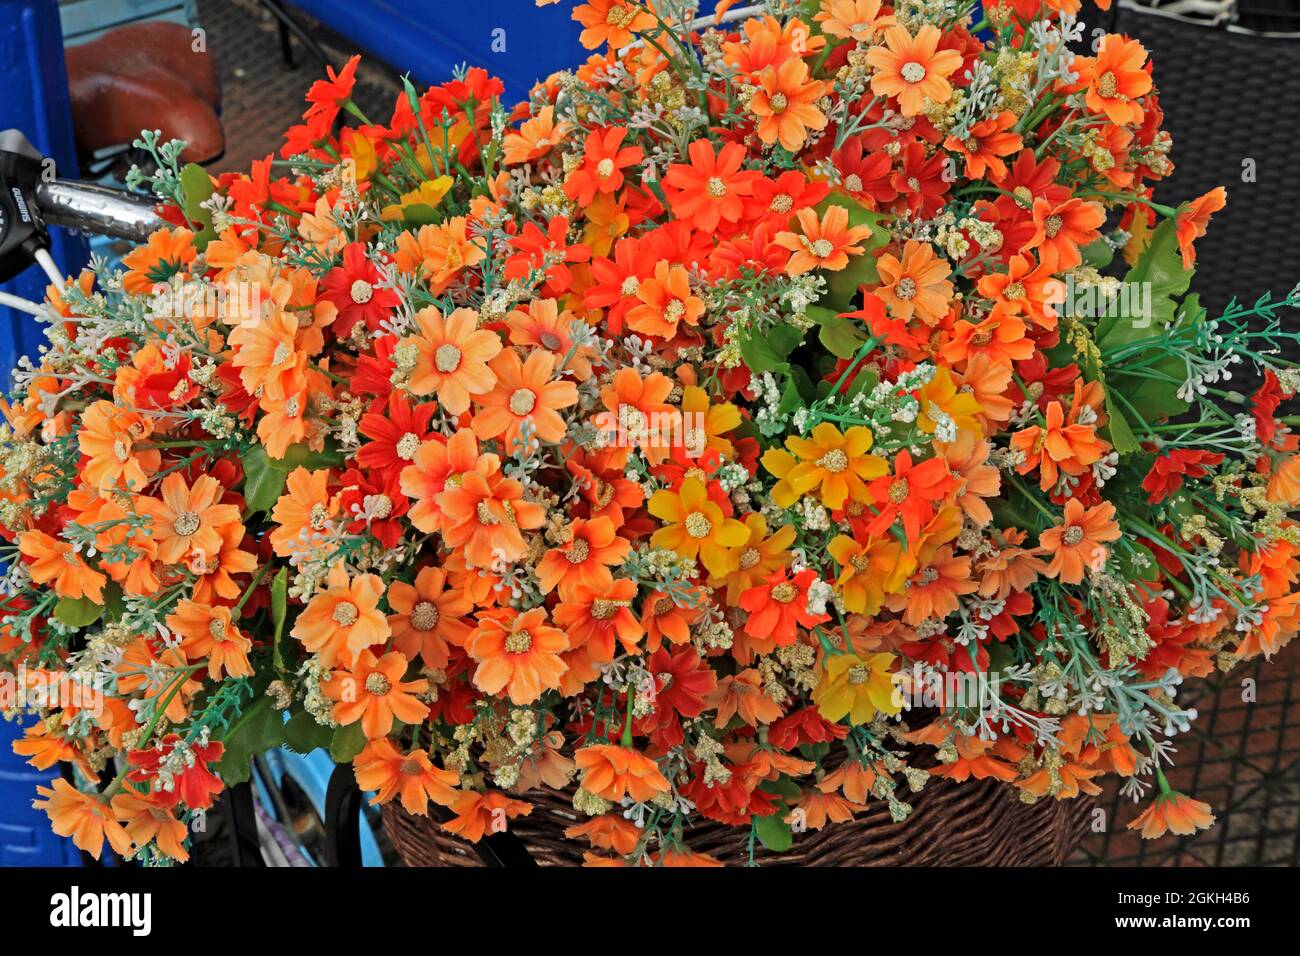 Bicycle front basket, flowers,plant container Stock Photo